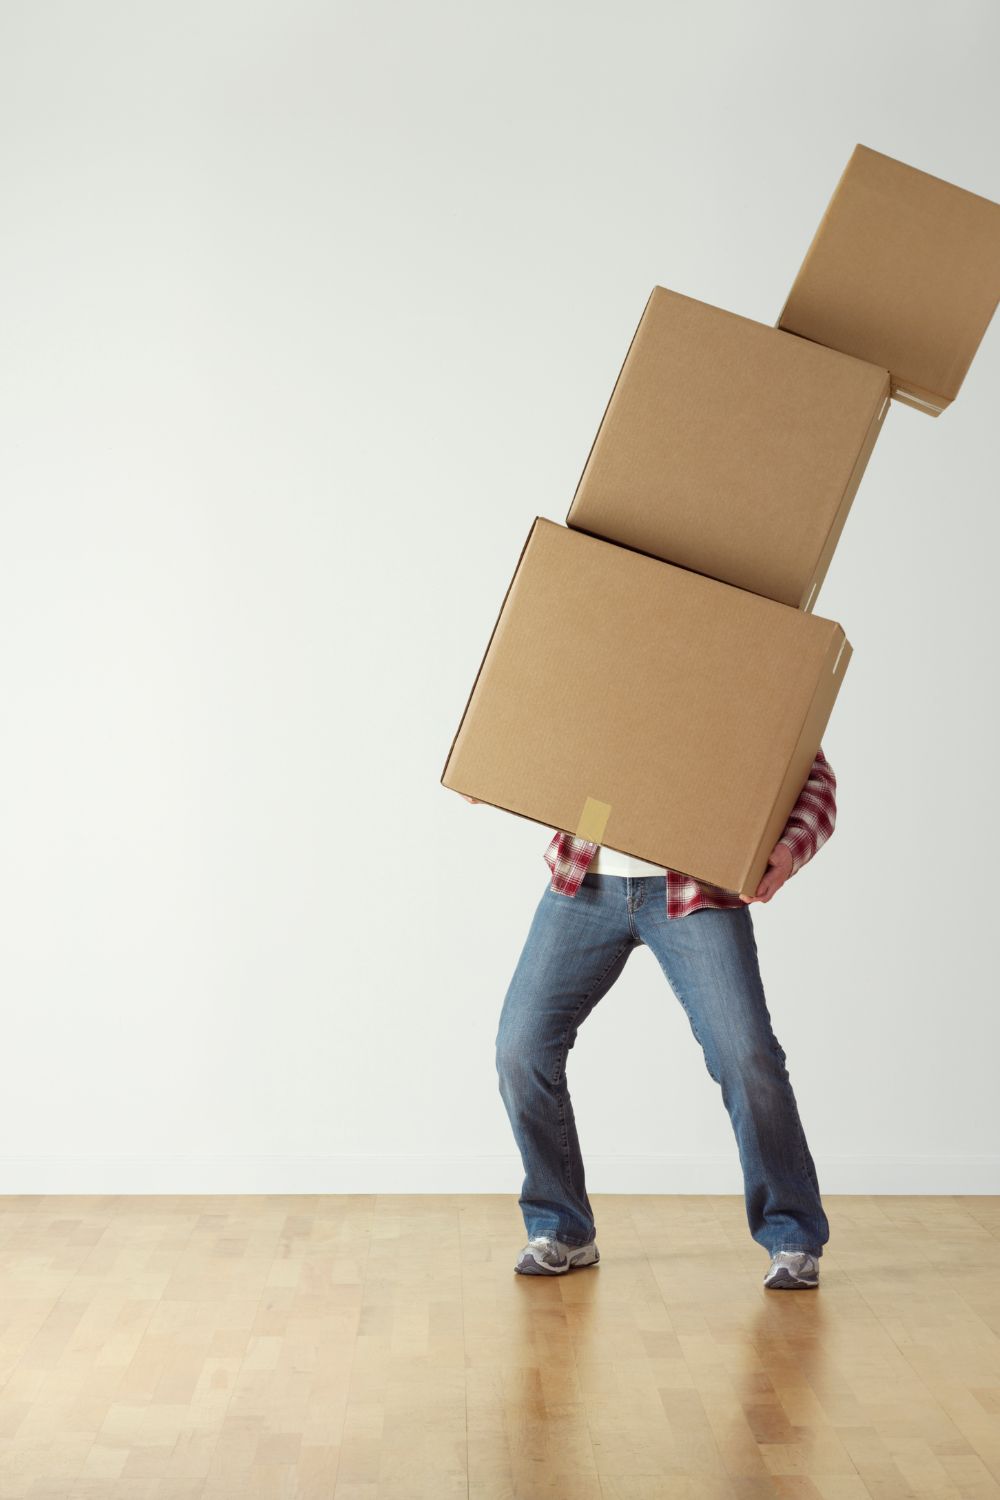 Smart Packing Tips for an Efficient Move